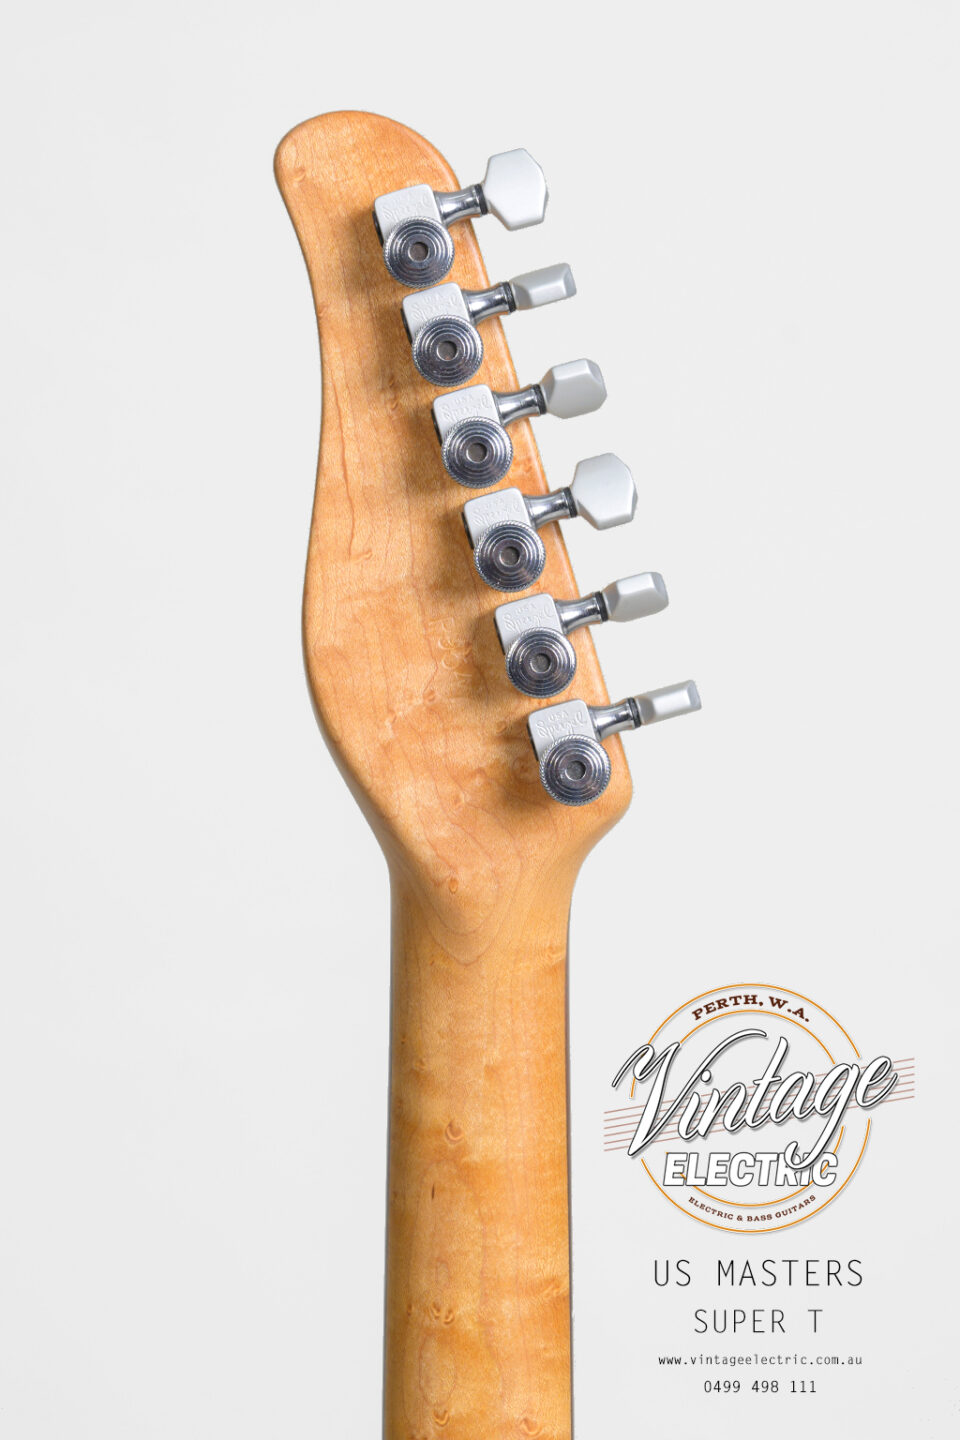 2012 US Masters Super T Back of Headstock